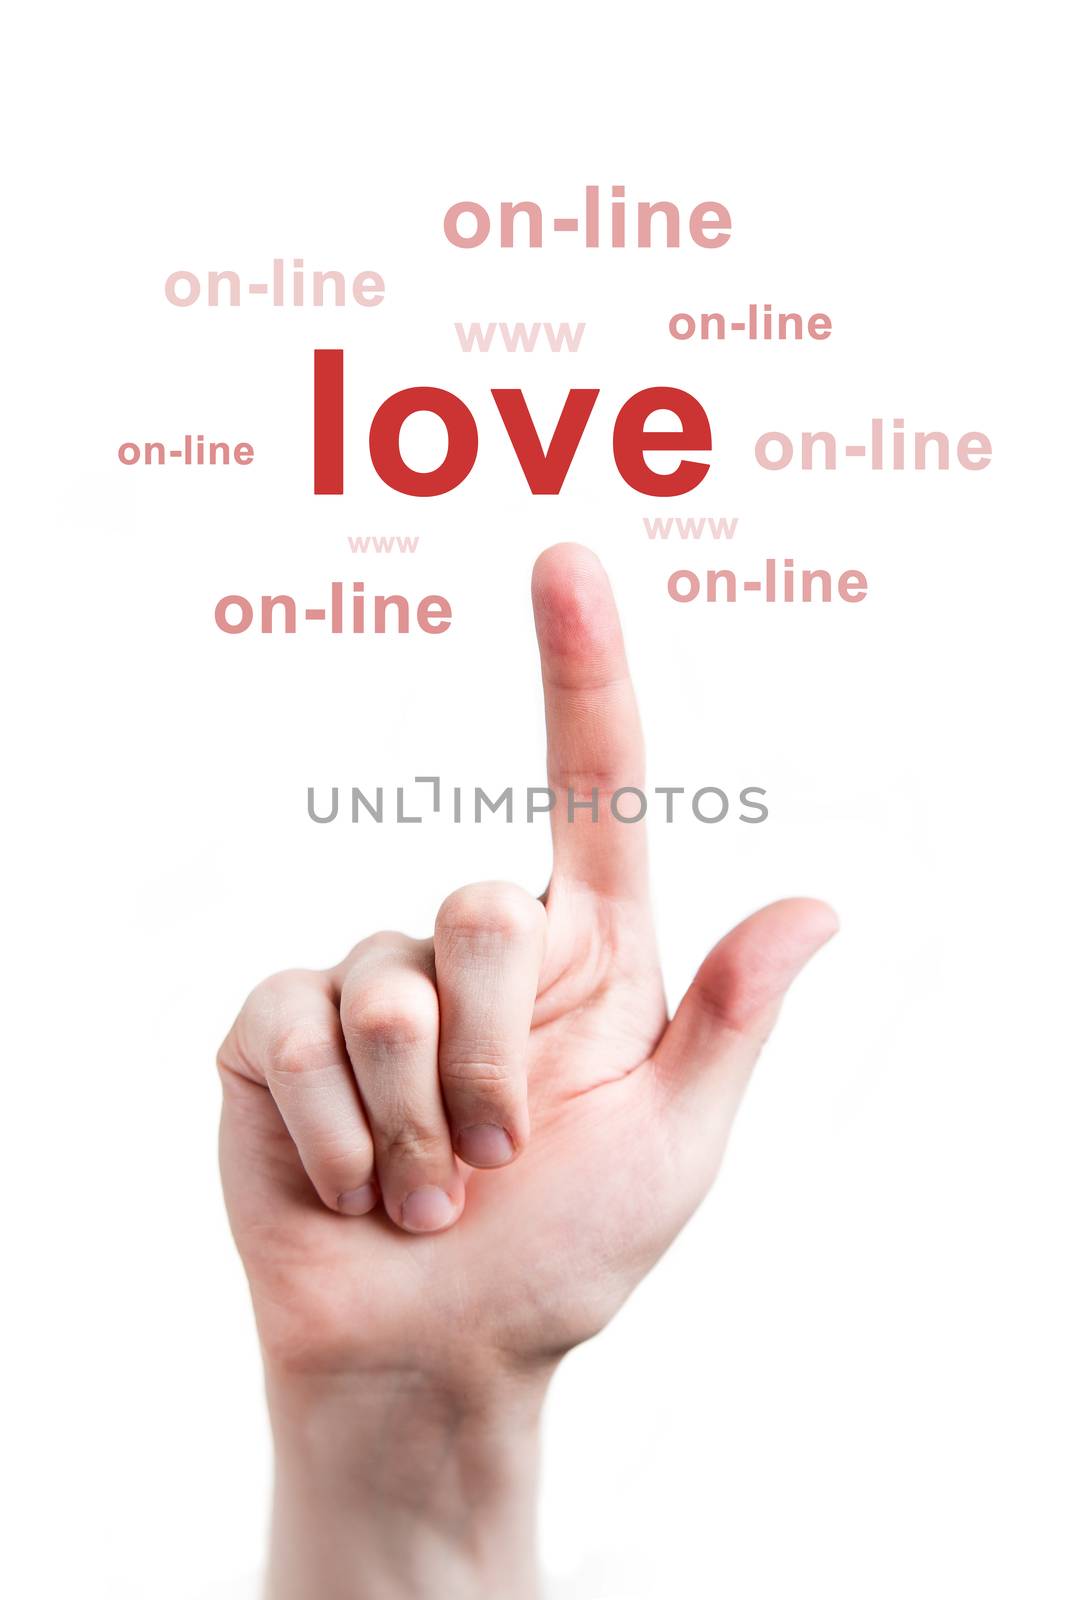 Love on the Internet by MichalLudwiczak